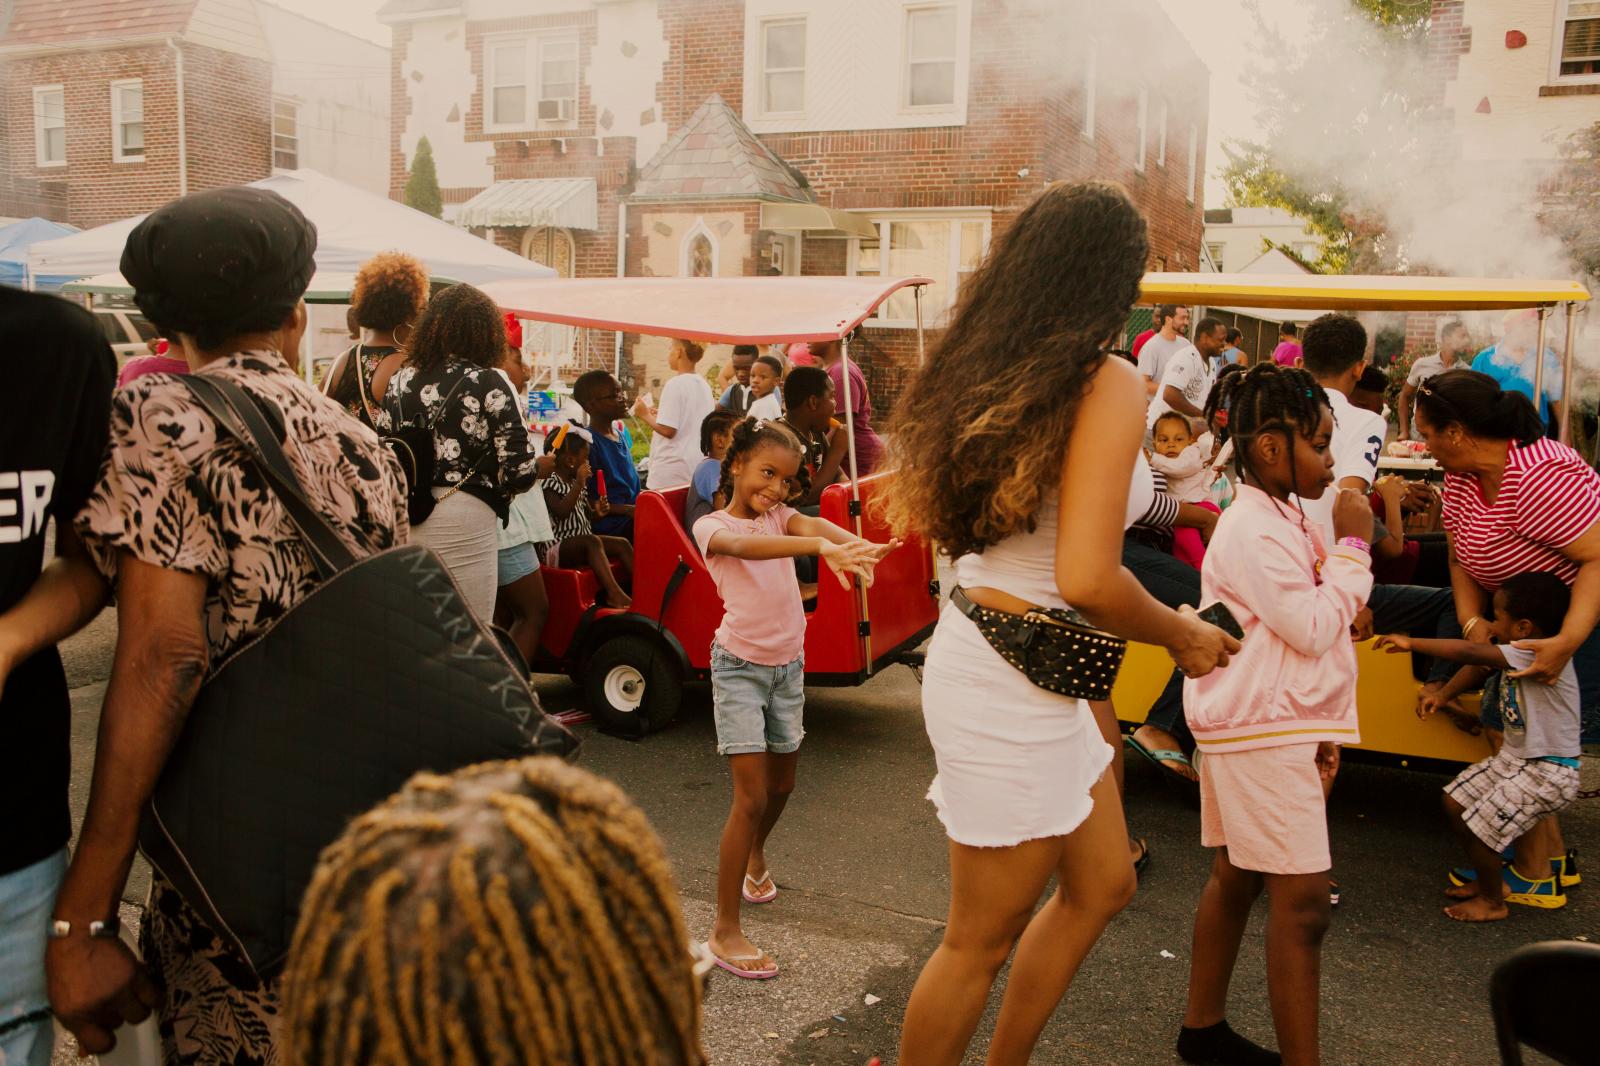 Malaysia Smith, 7, reaches out to her mom after getting off the trackless train from OnTimeEntertainment during the block party in Laurelton neighborhood in Queens, New York hosted by Sudan Deane.